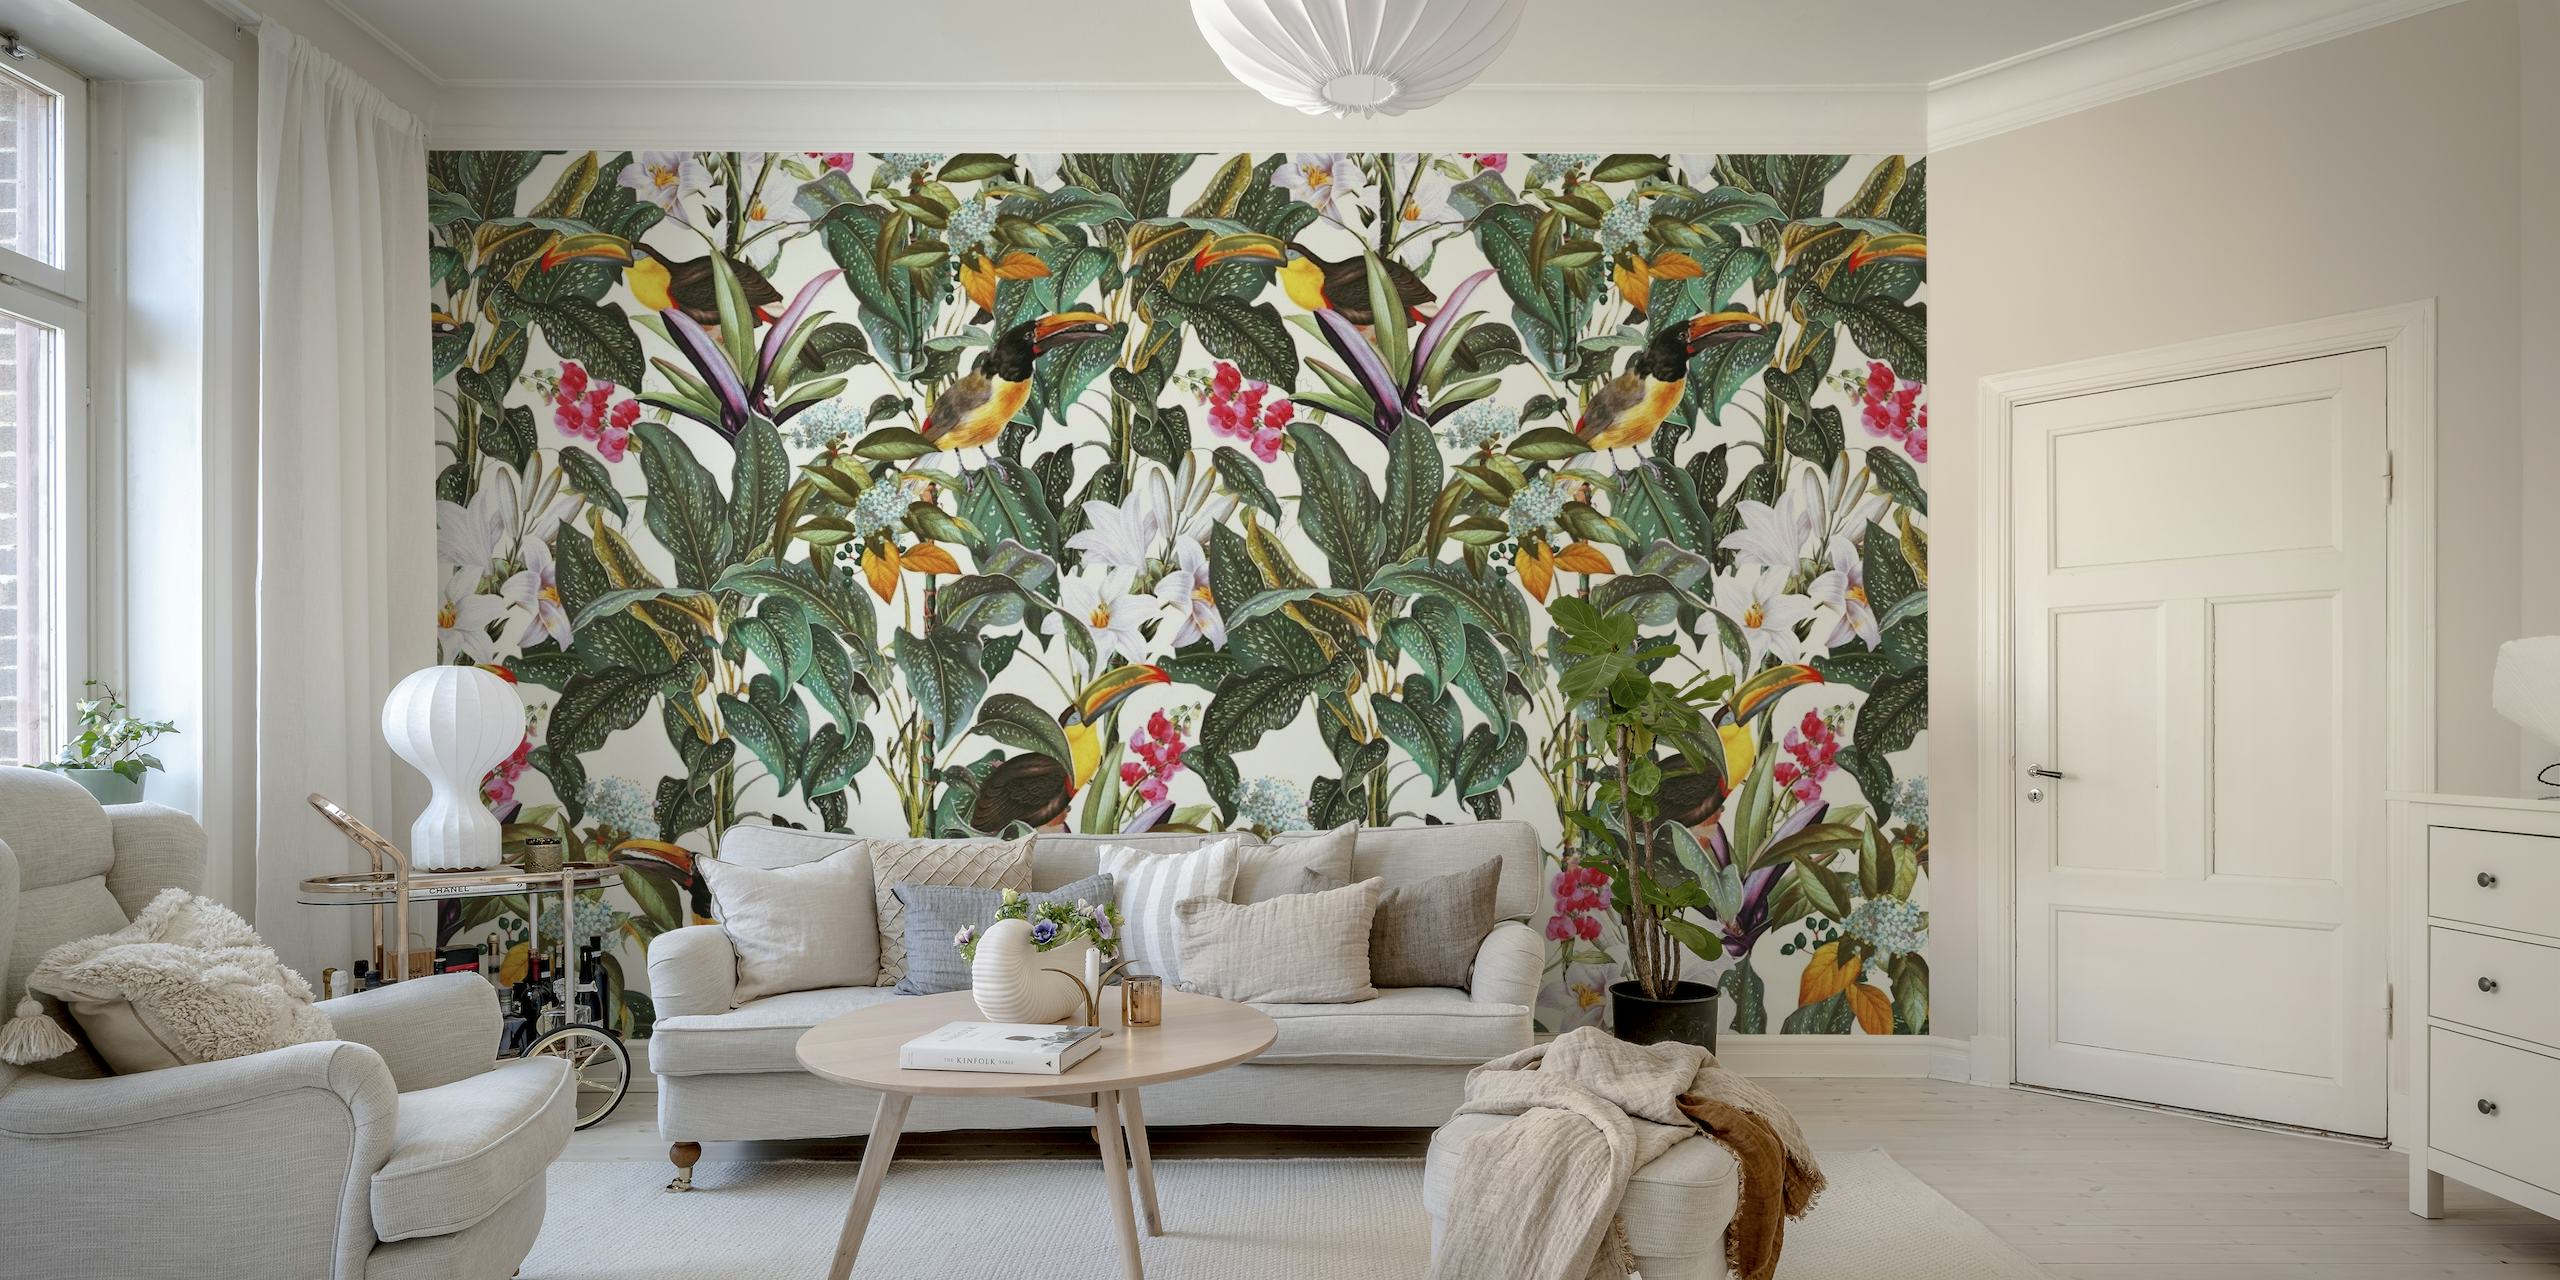 Tropical Toucan Garden wall mural with vibrant toucans and exotic flowers